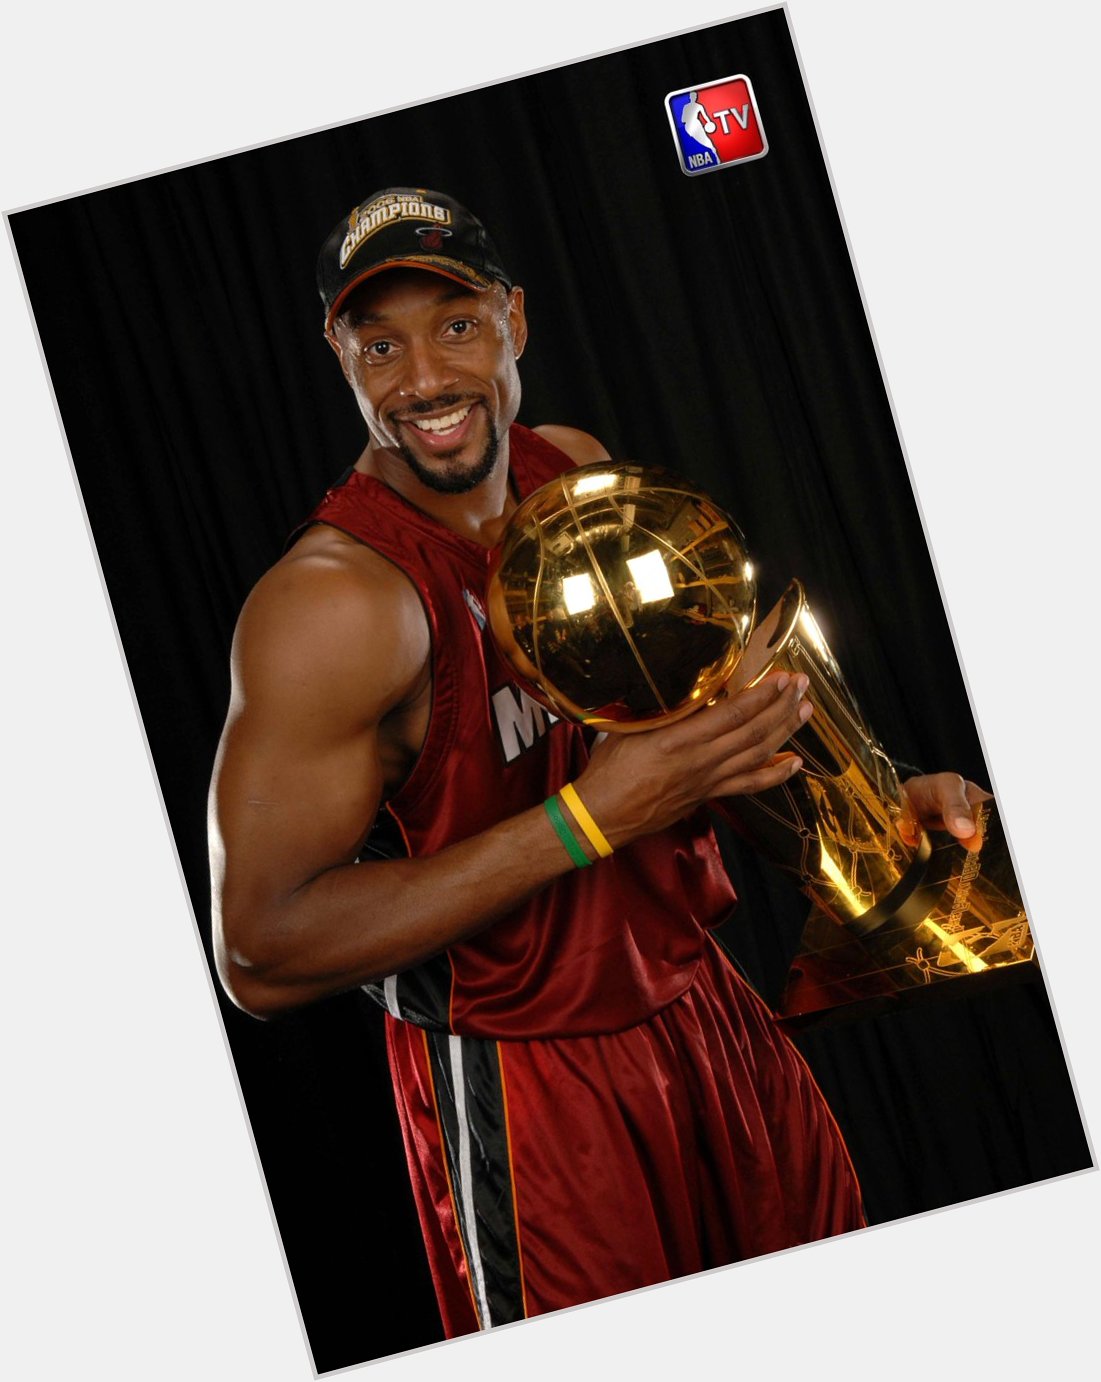 Join us in wishing 7-time All-Star Alonzo Mourning a Happy 45th Birthday! 